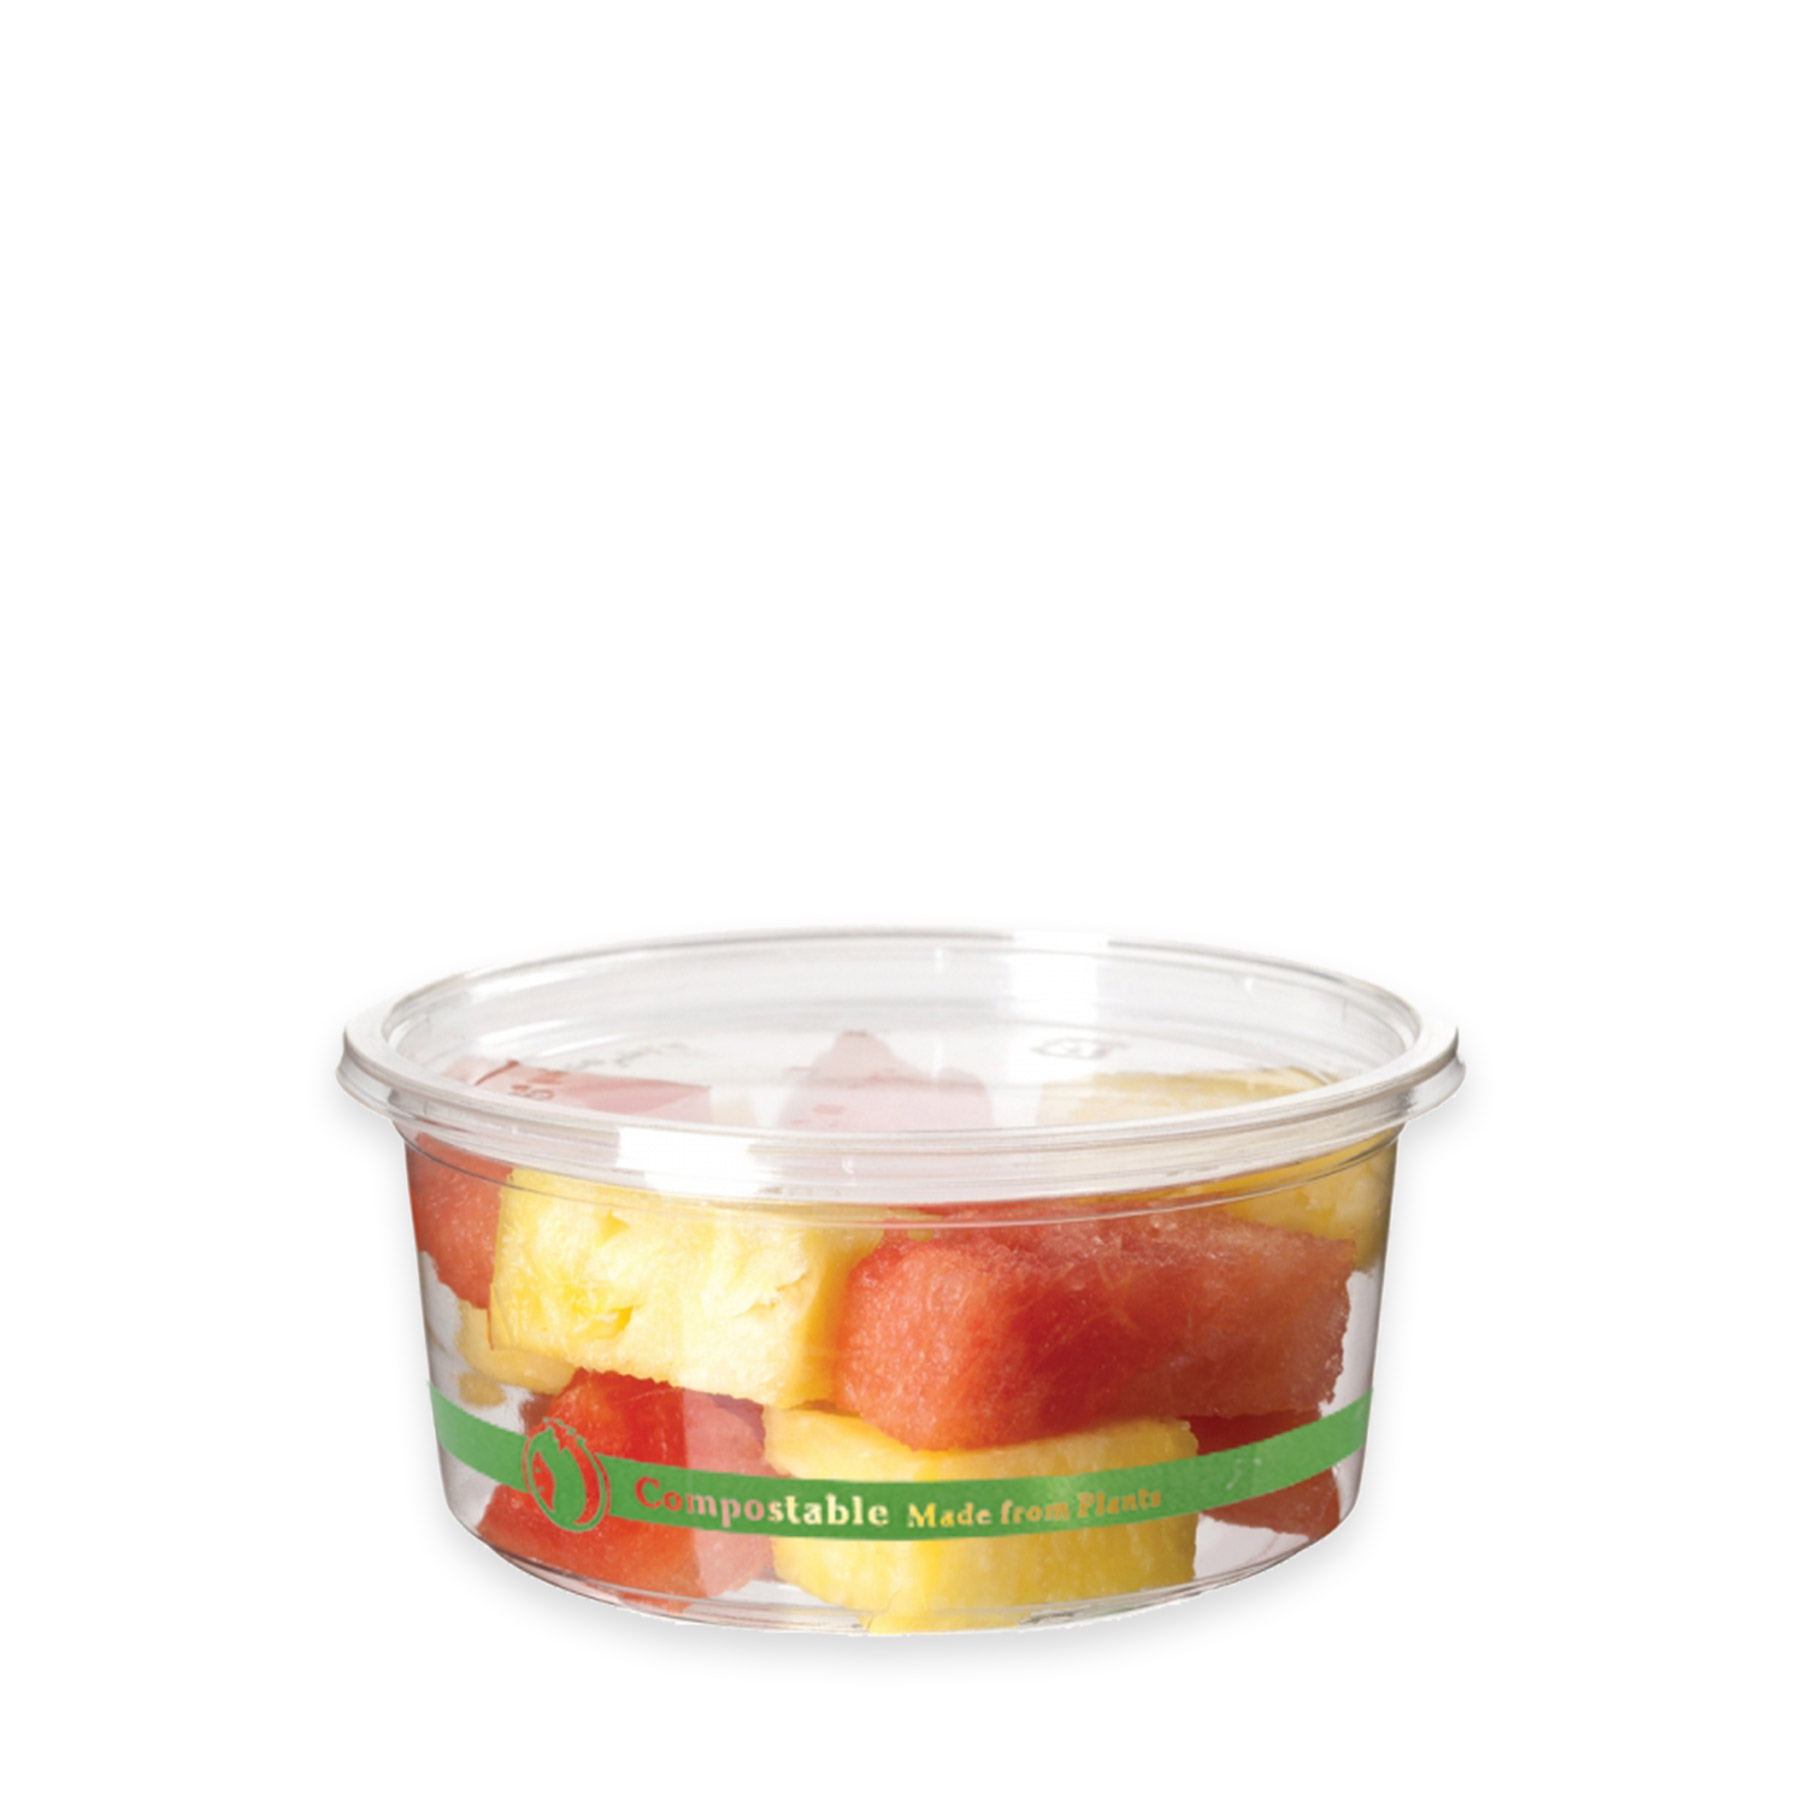 Sample of 12 oz Clear Compostable Round Deli Container